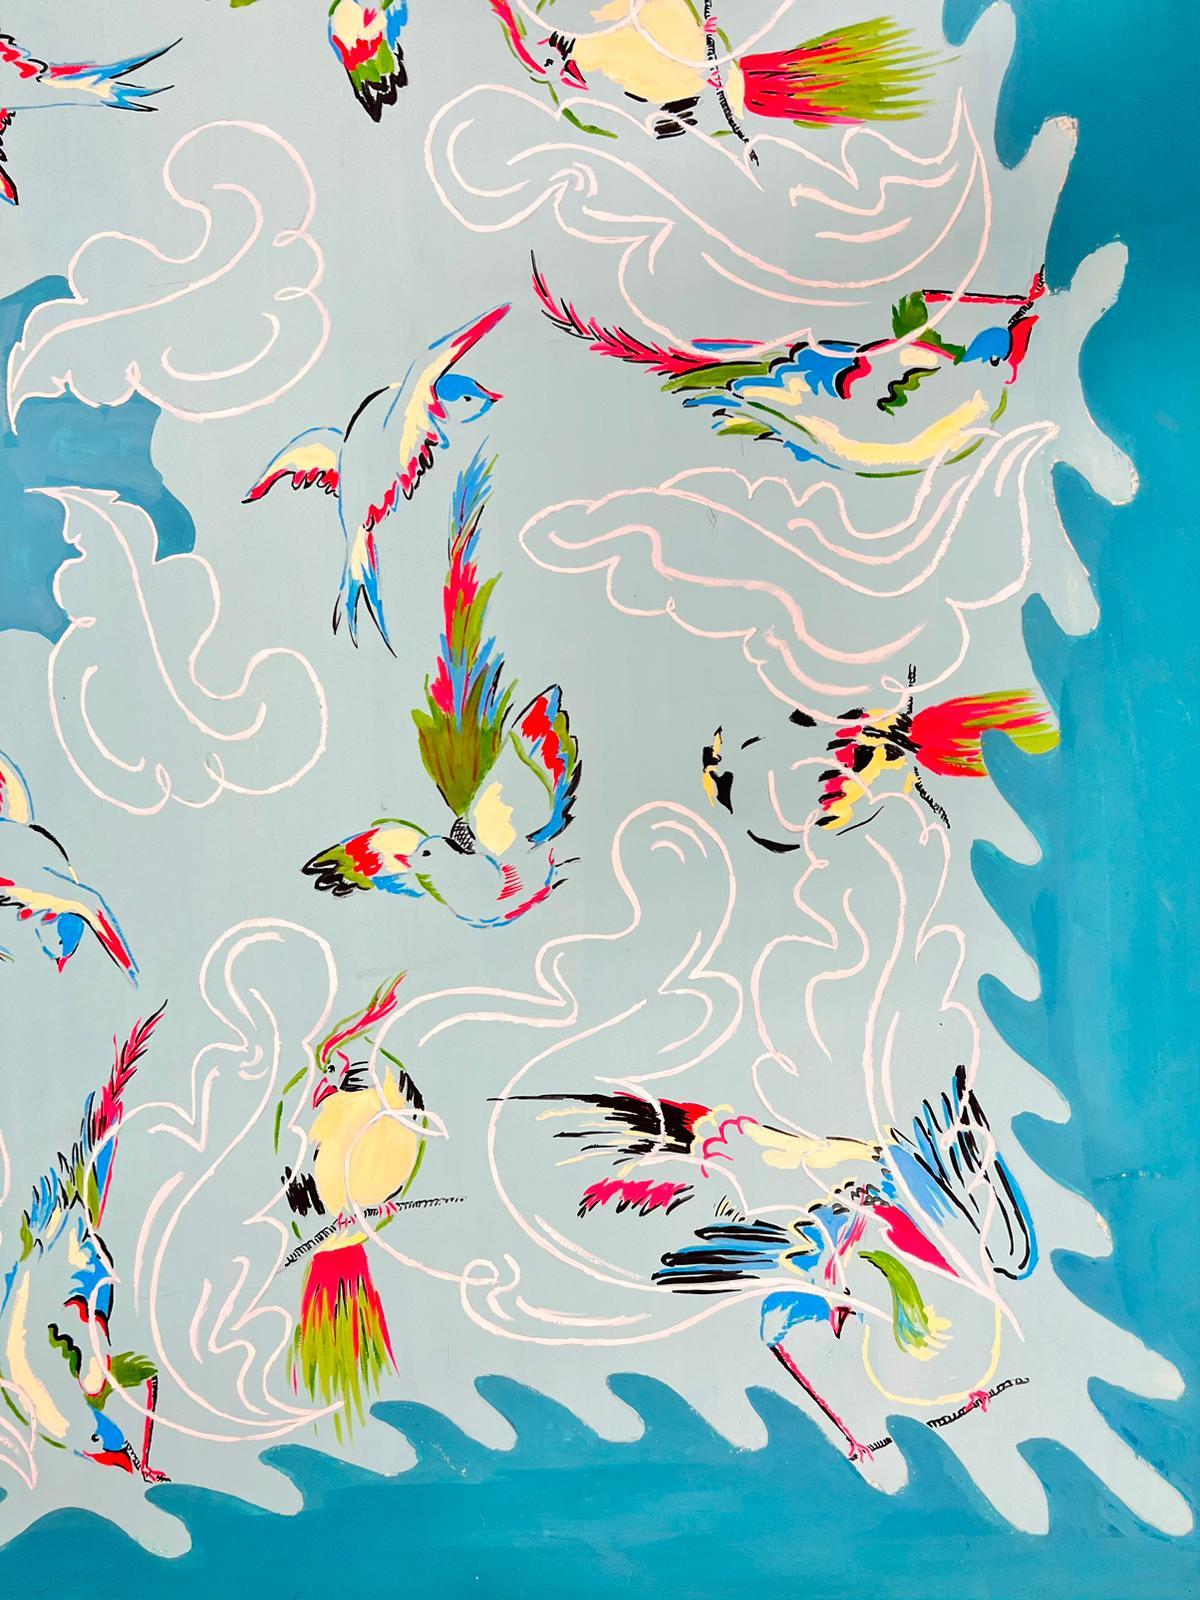 Mid Century French Illustration Sketch Of A Blue Bird Wallpaper Design - Painting by Josine Vignon